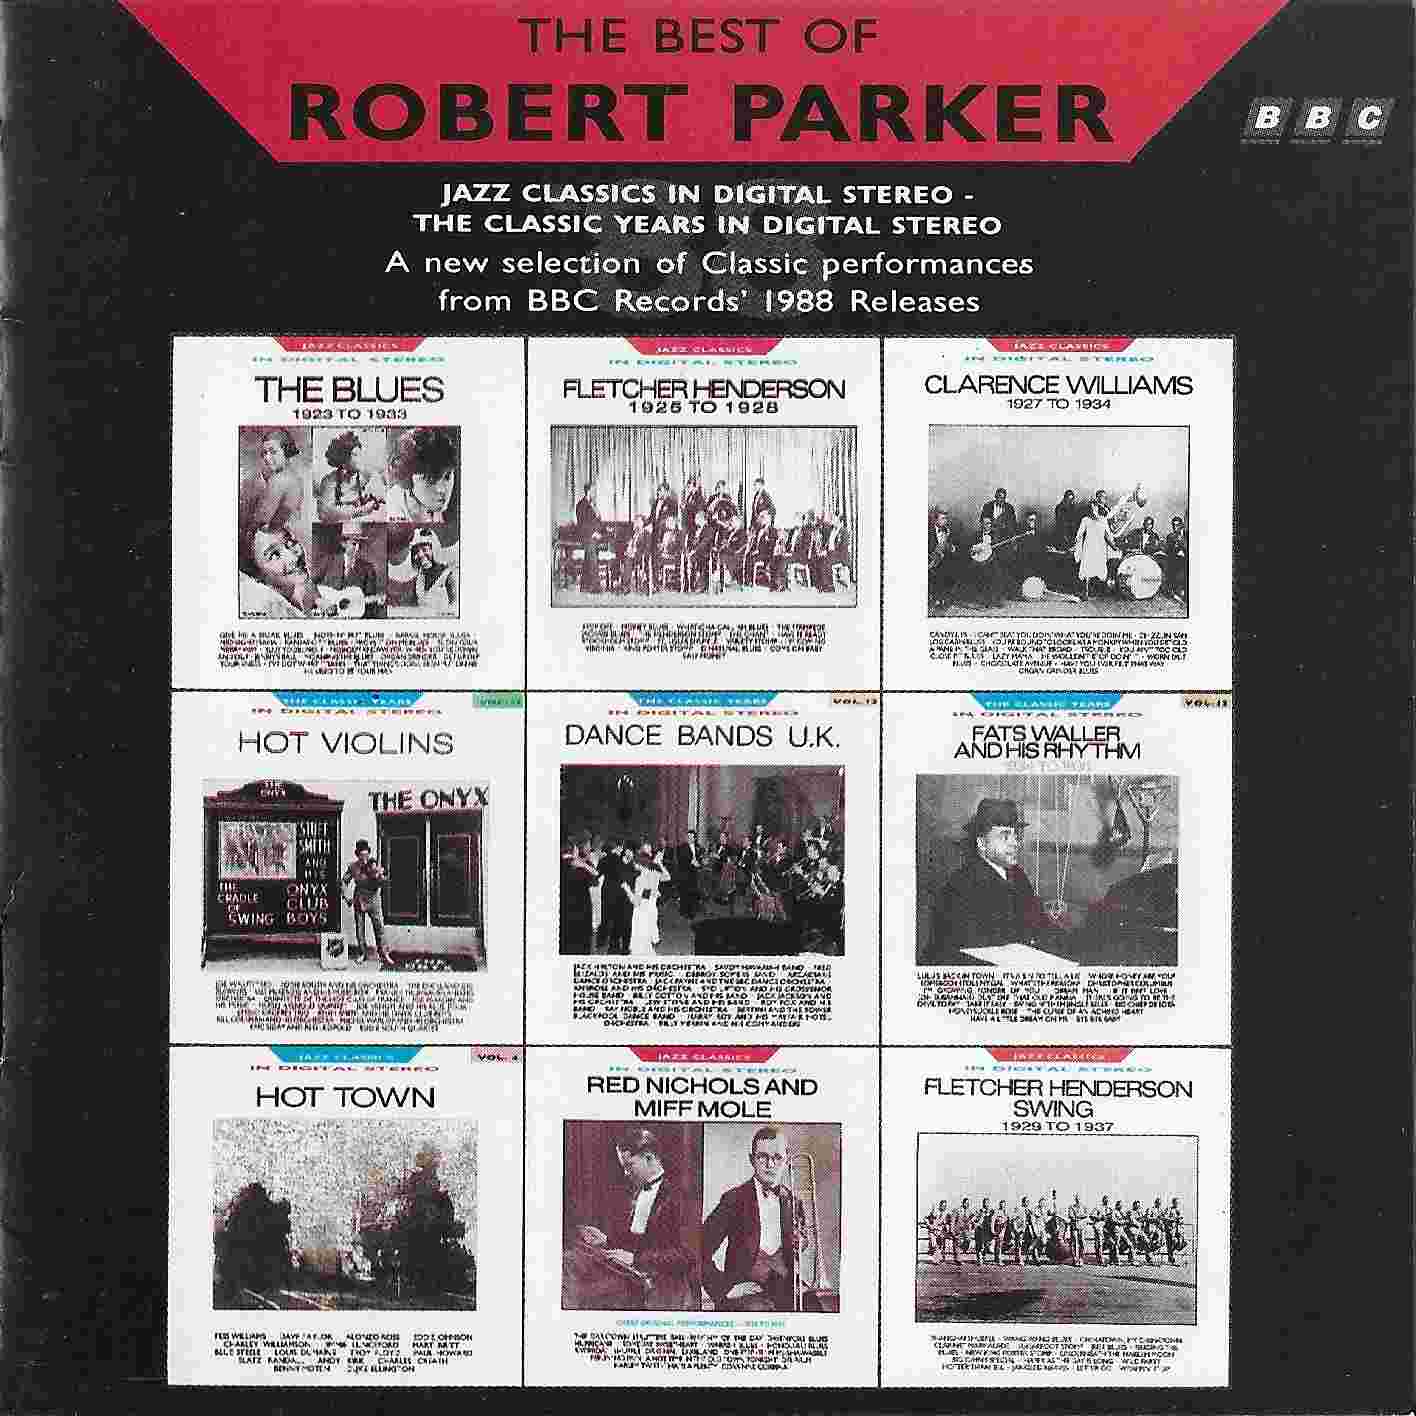 Picture of BBCCD725 The best of Robert Parker 1988 by artist Various from the BBC cds - Records and Tapes library